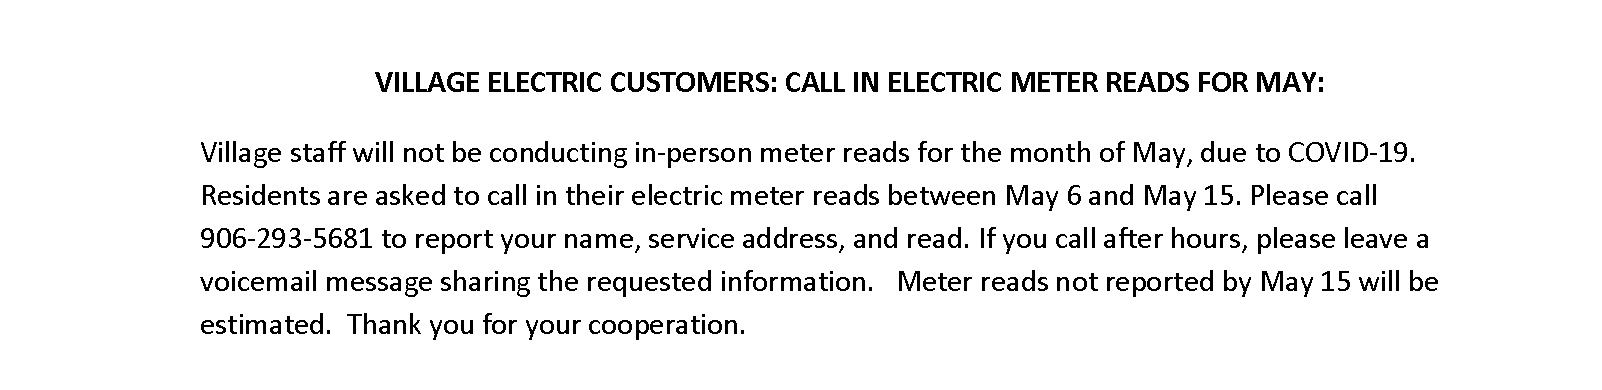 Public Notice - Meter reads for May 2020 cropped